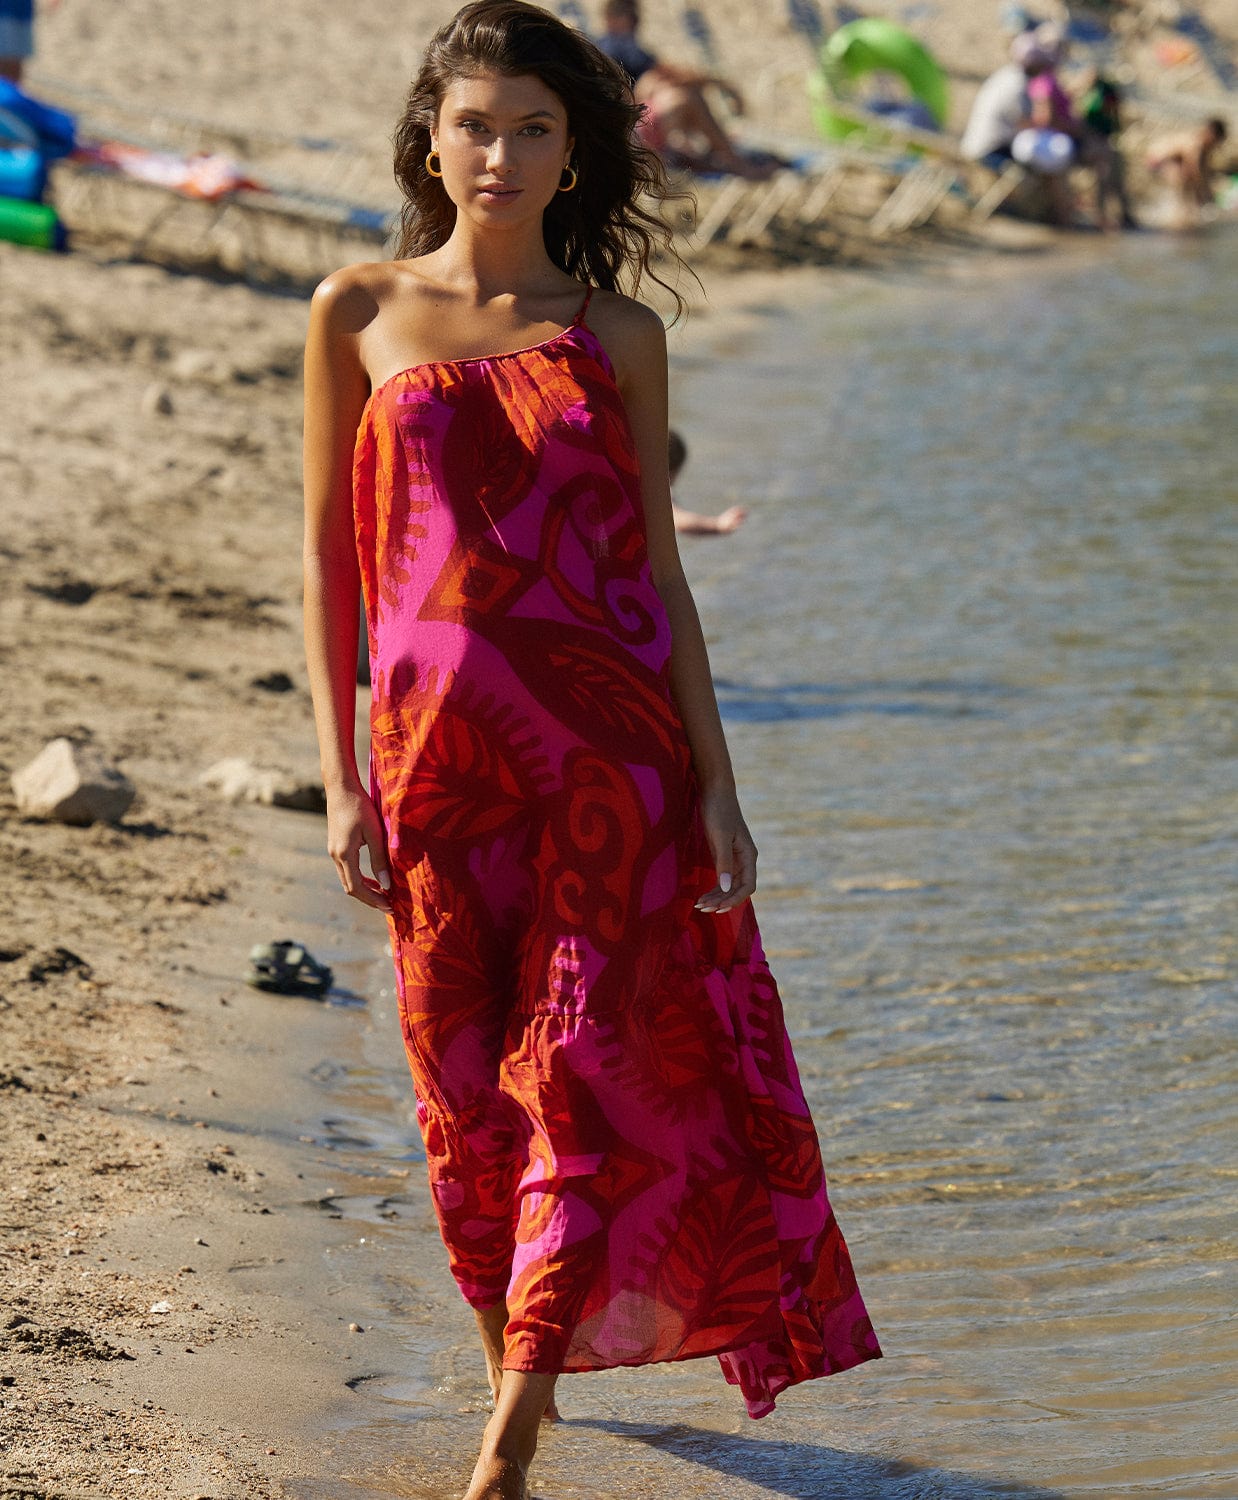 Brunette woman wearing an ankle length dress with one shoulder strap. She is walking on the beach near a lake.